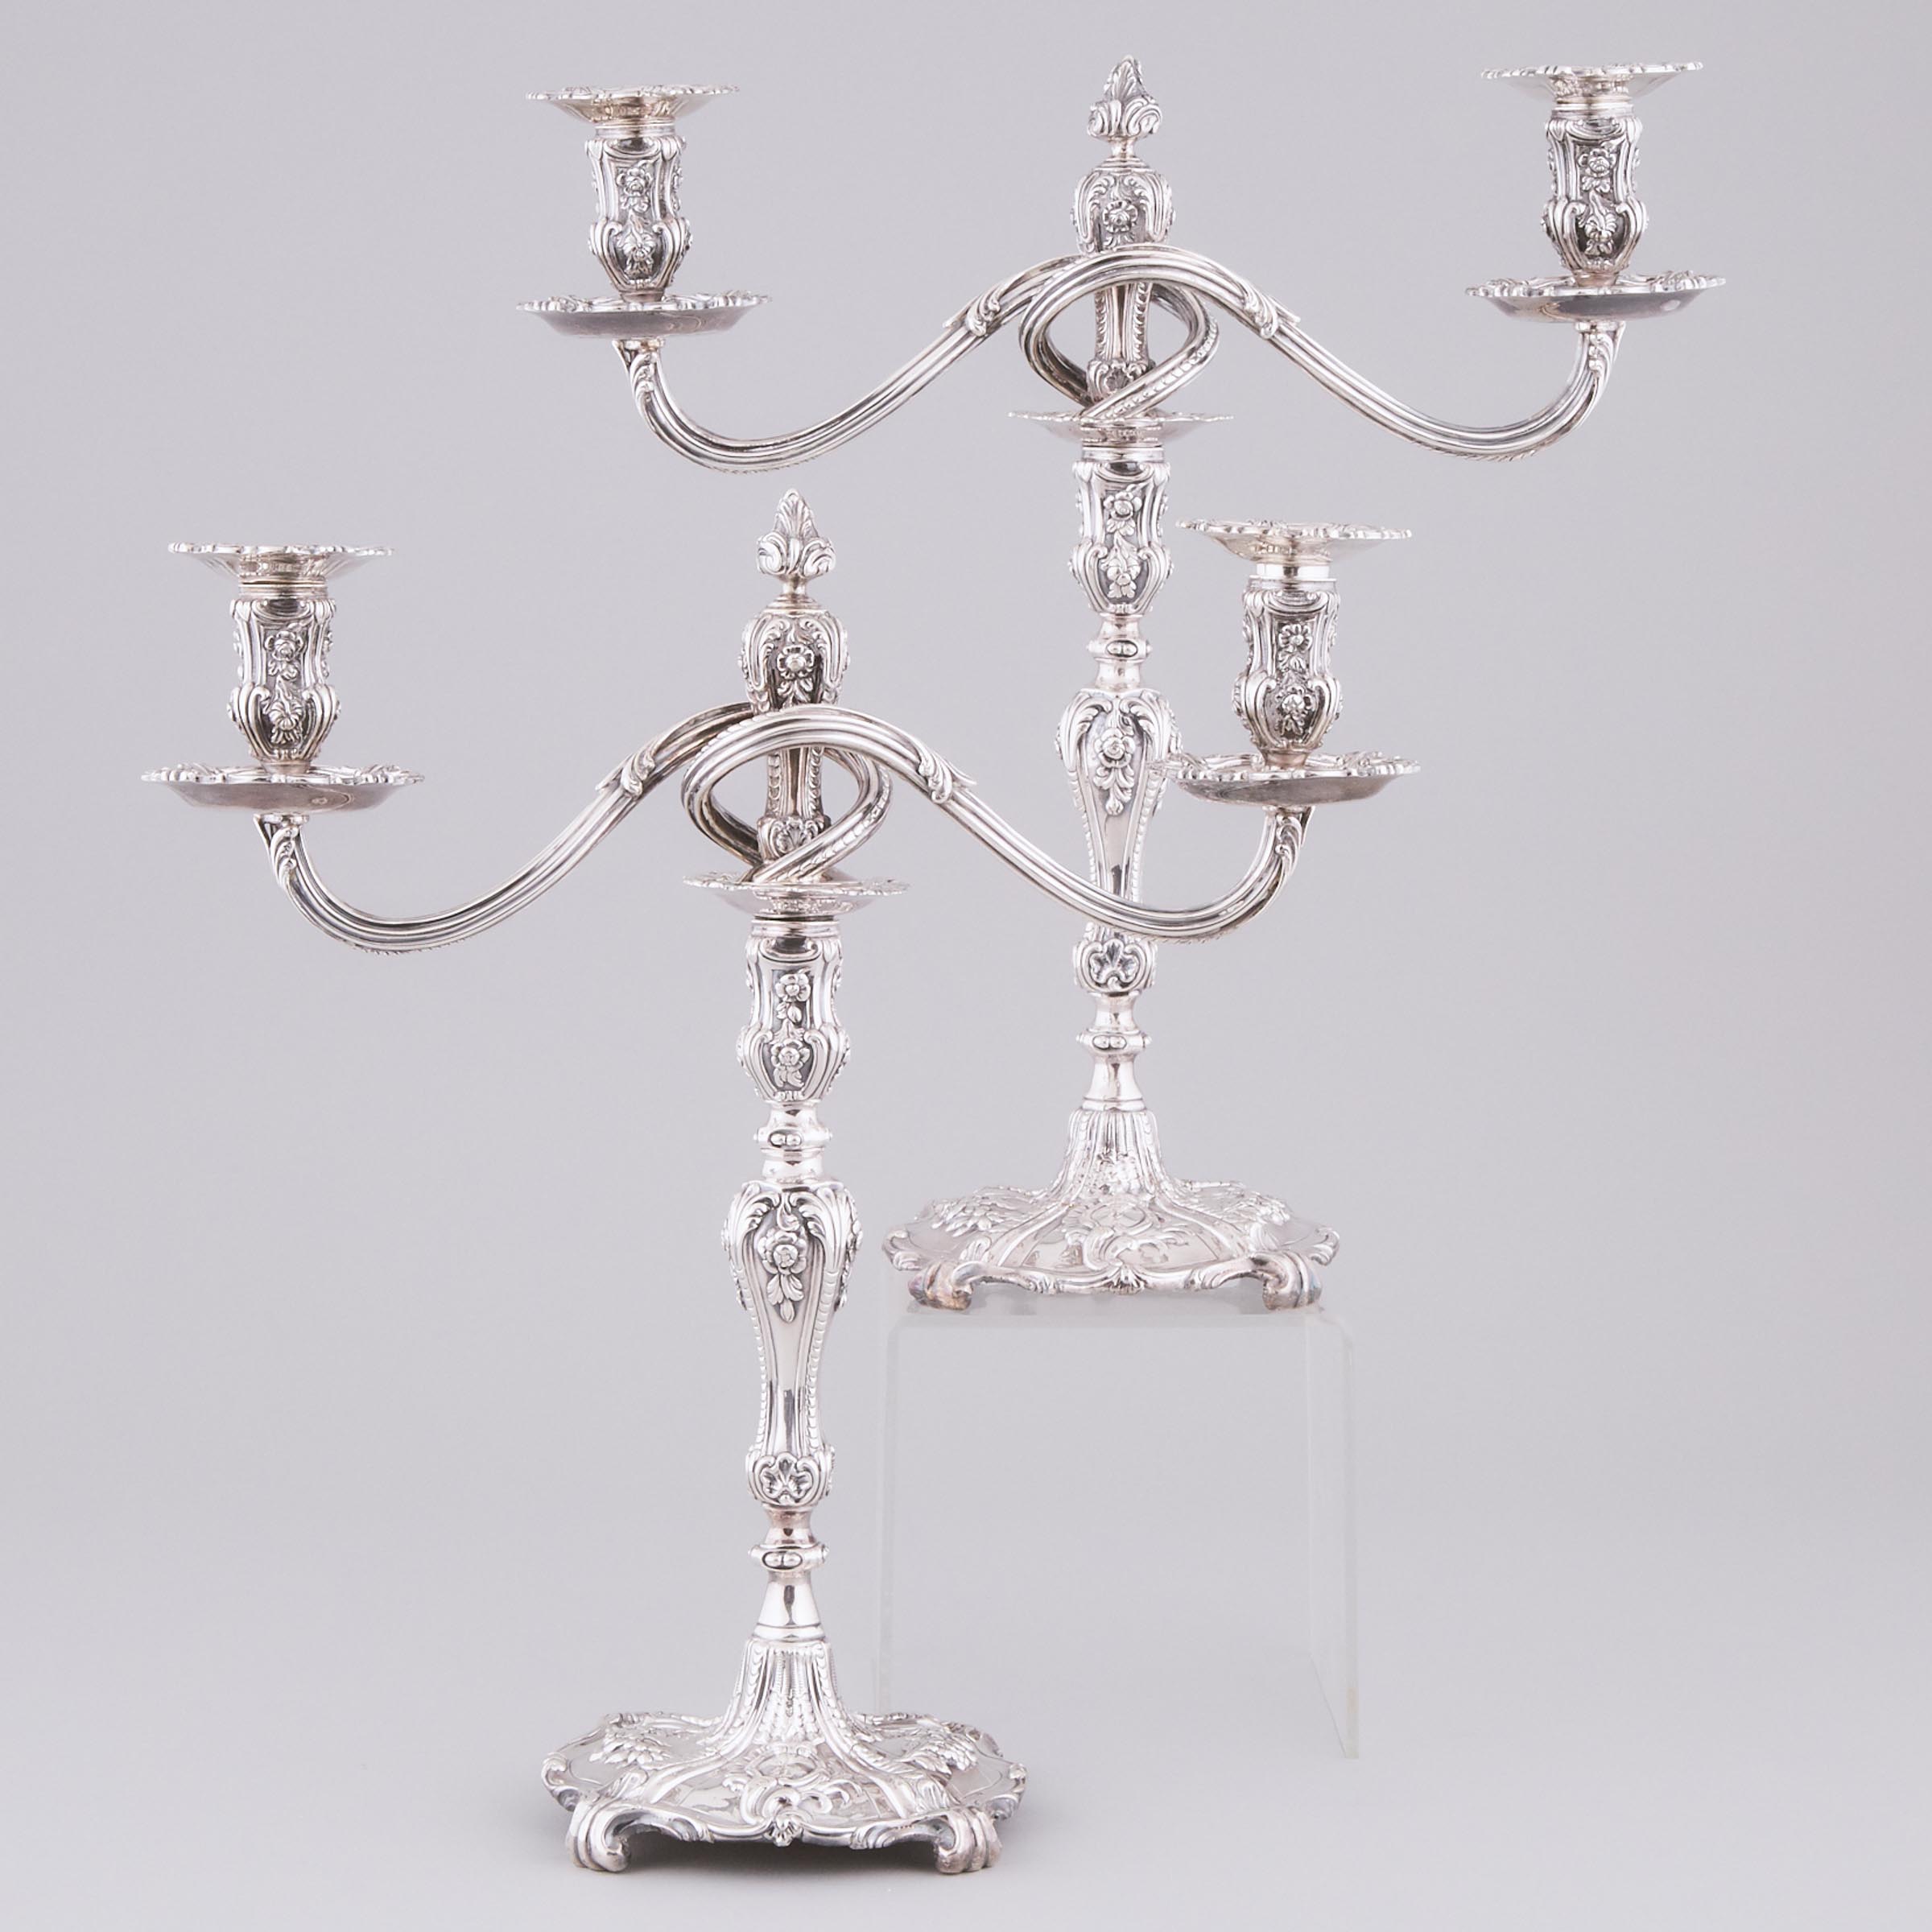 Pair of Georgian and Later Silver Two-Light Candelabra, the bases possibly Louis Herne, London, 18th century